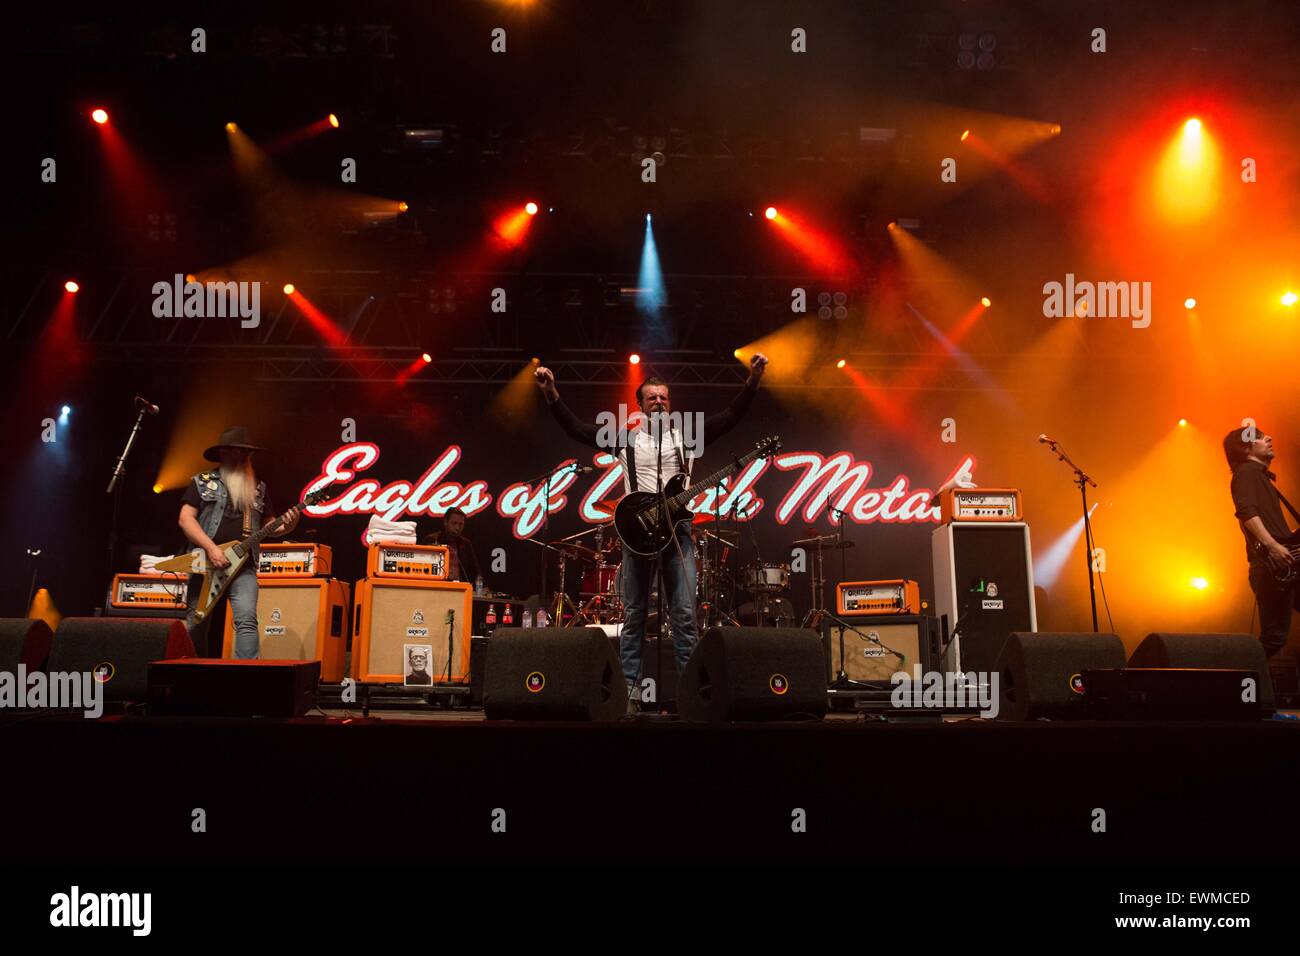 Eagles of Death Metal esegue live at Pinkpop Festival 2015 in Paesi Bassi © Roberto Finizio / Alamy Live News Foto Stock